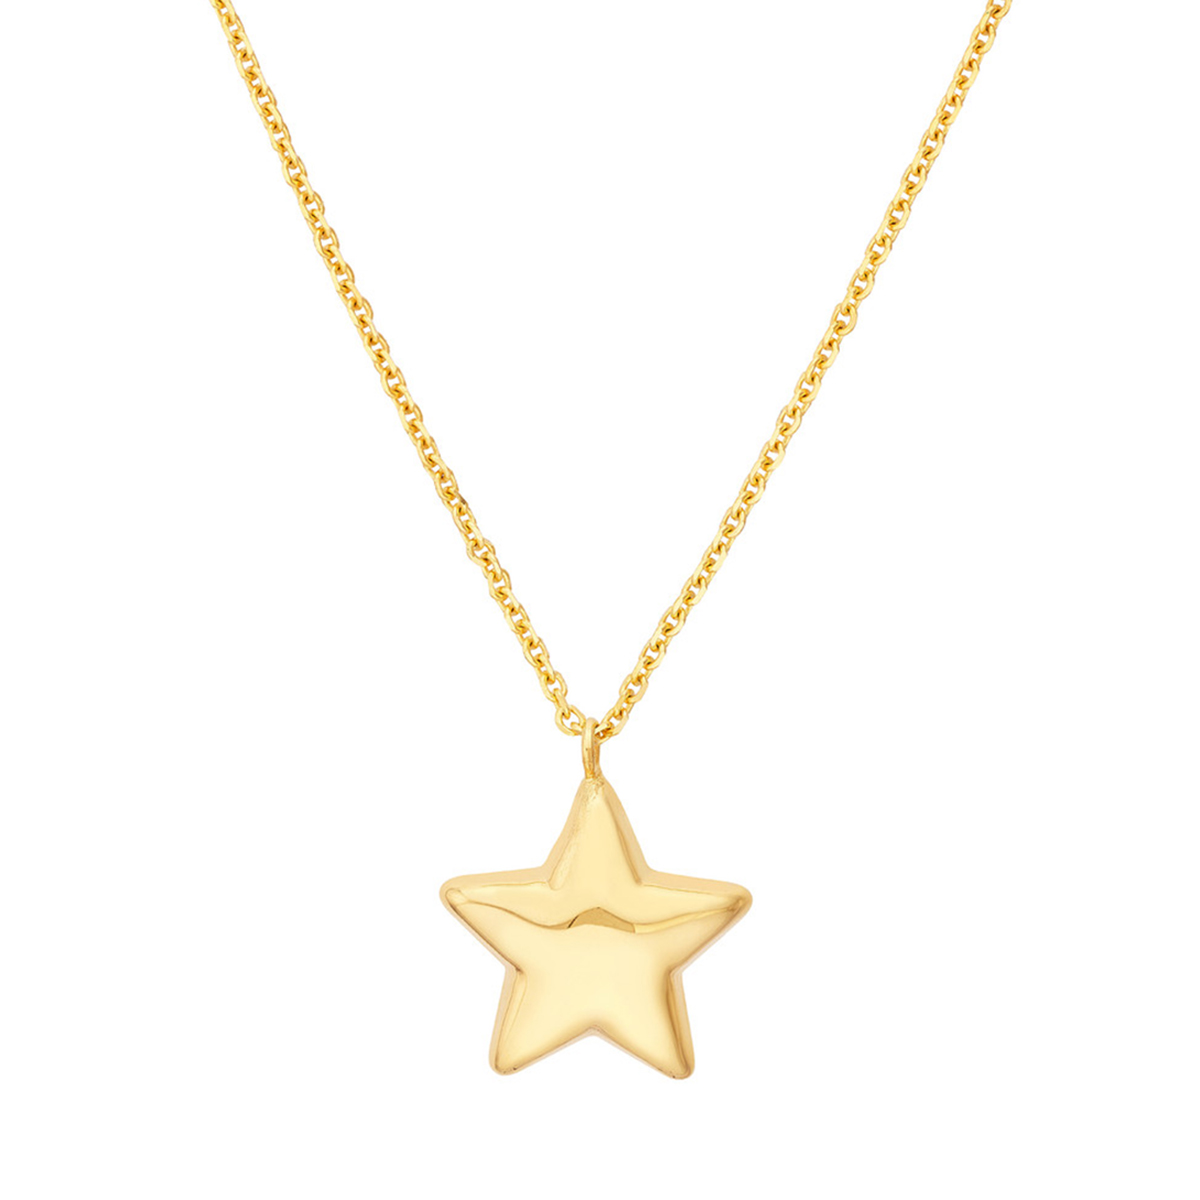 Image of 14K Solid Yellow Gold Puff Star Necklace with Lobster